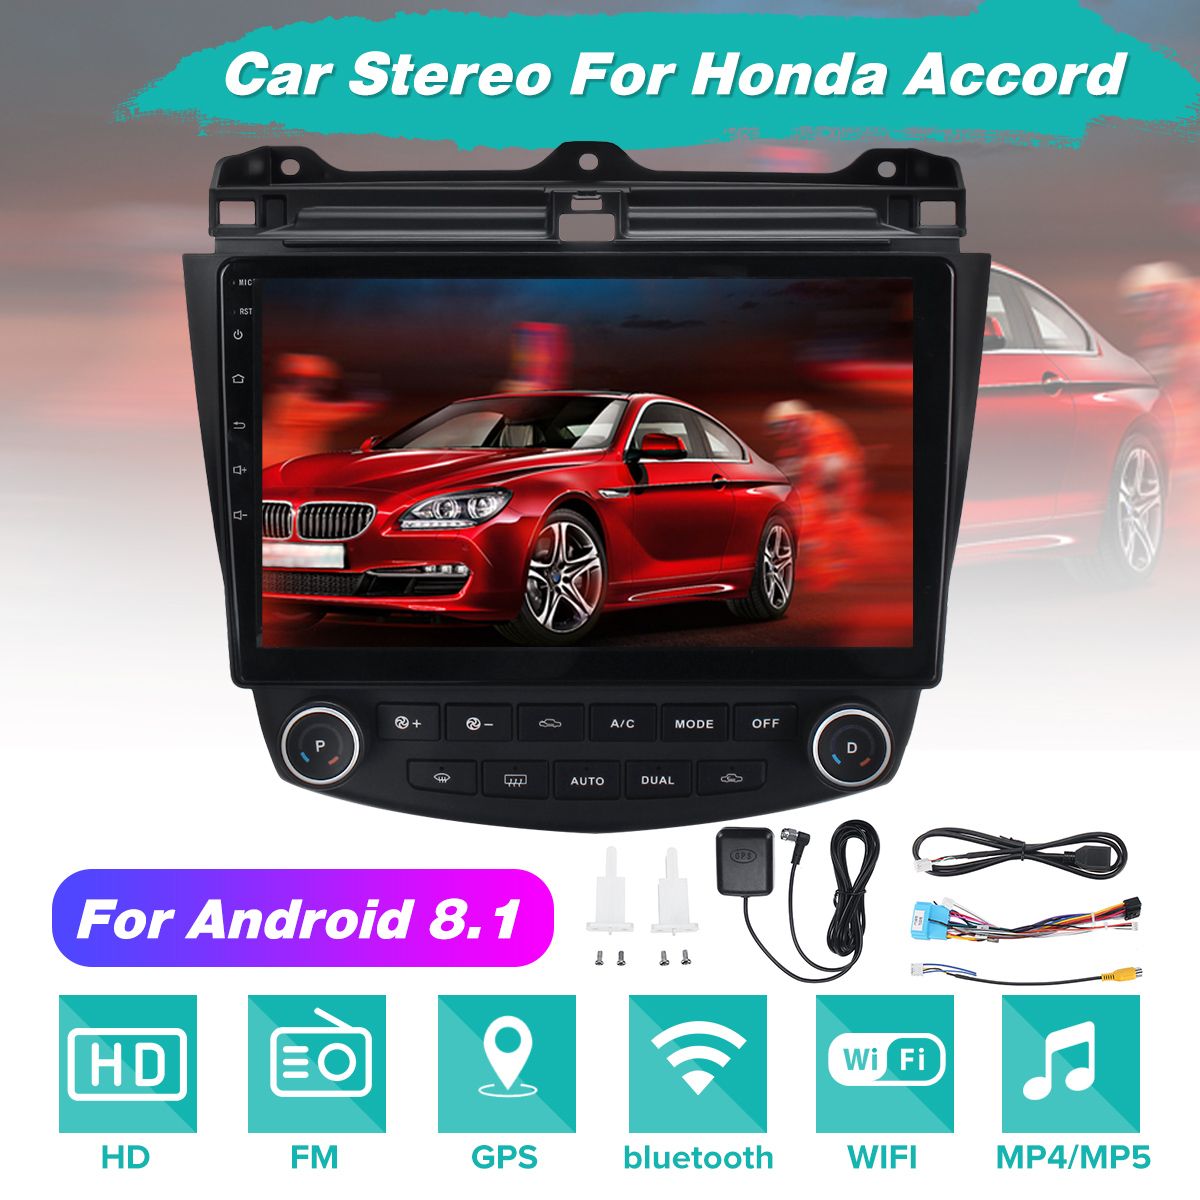 101-Inch-2-DIN-for-Android-81-Car-Stereo-116G-Quad-Core-MP5-Player-GPS-WIFI-FM-AM-Radio-for-Honda-Ac-1471428